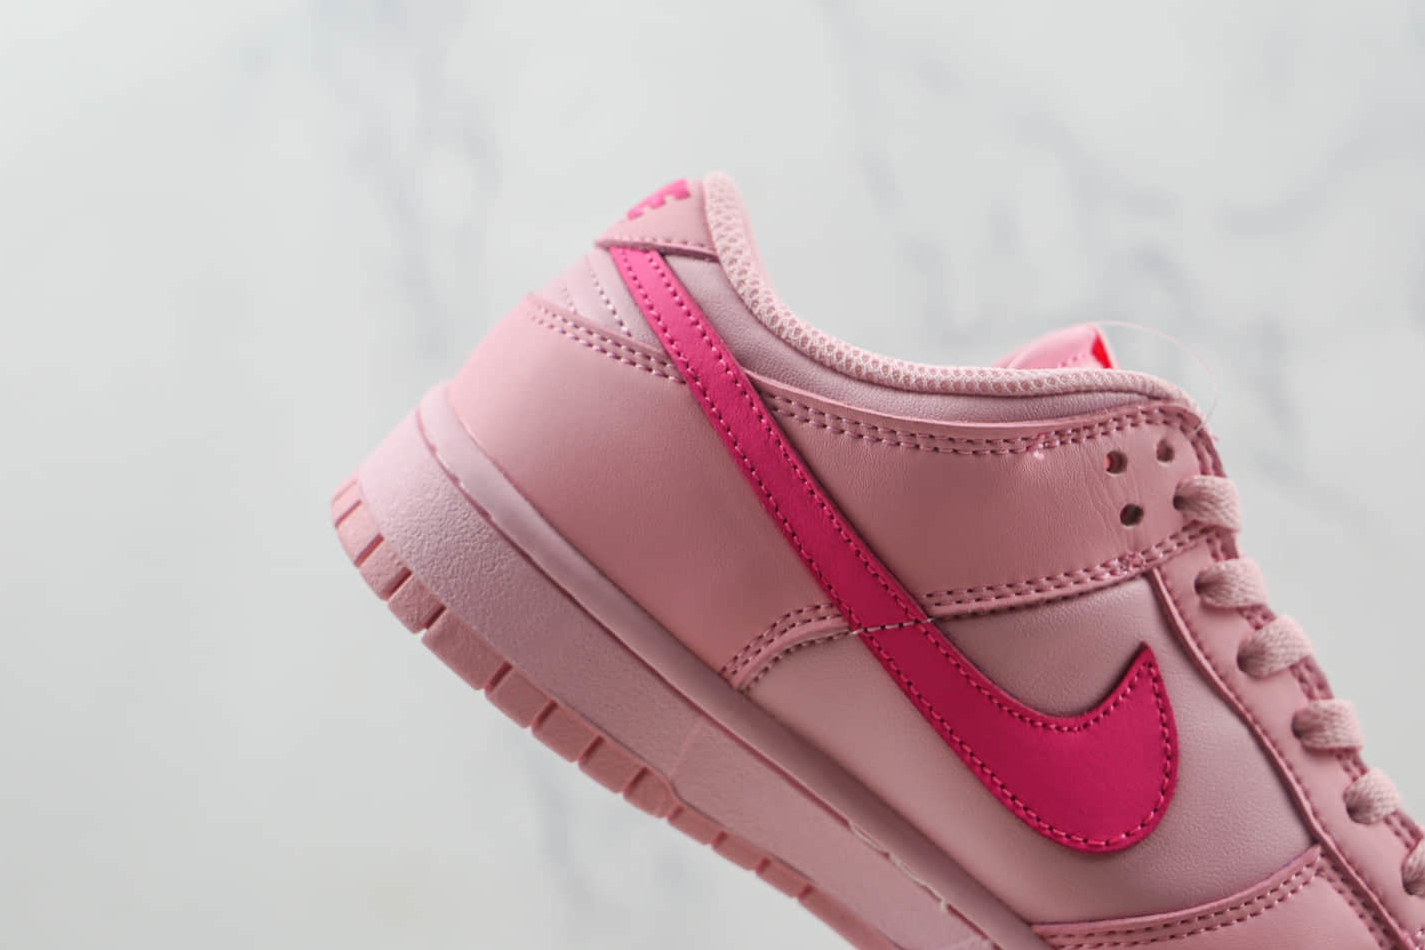 Nike Dunk Low Triple Pink DH9756-600 | Shop the Latest Nike Dunk Styles